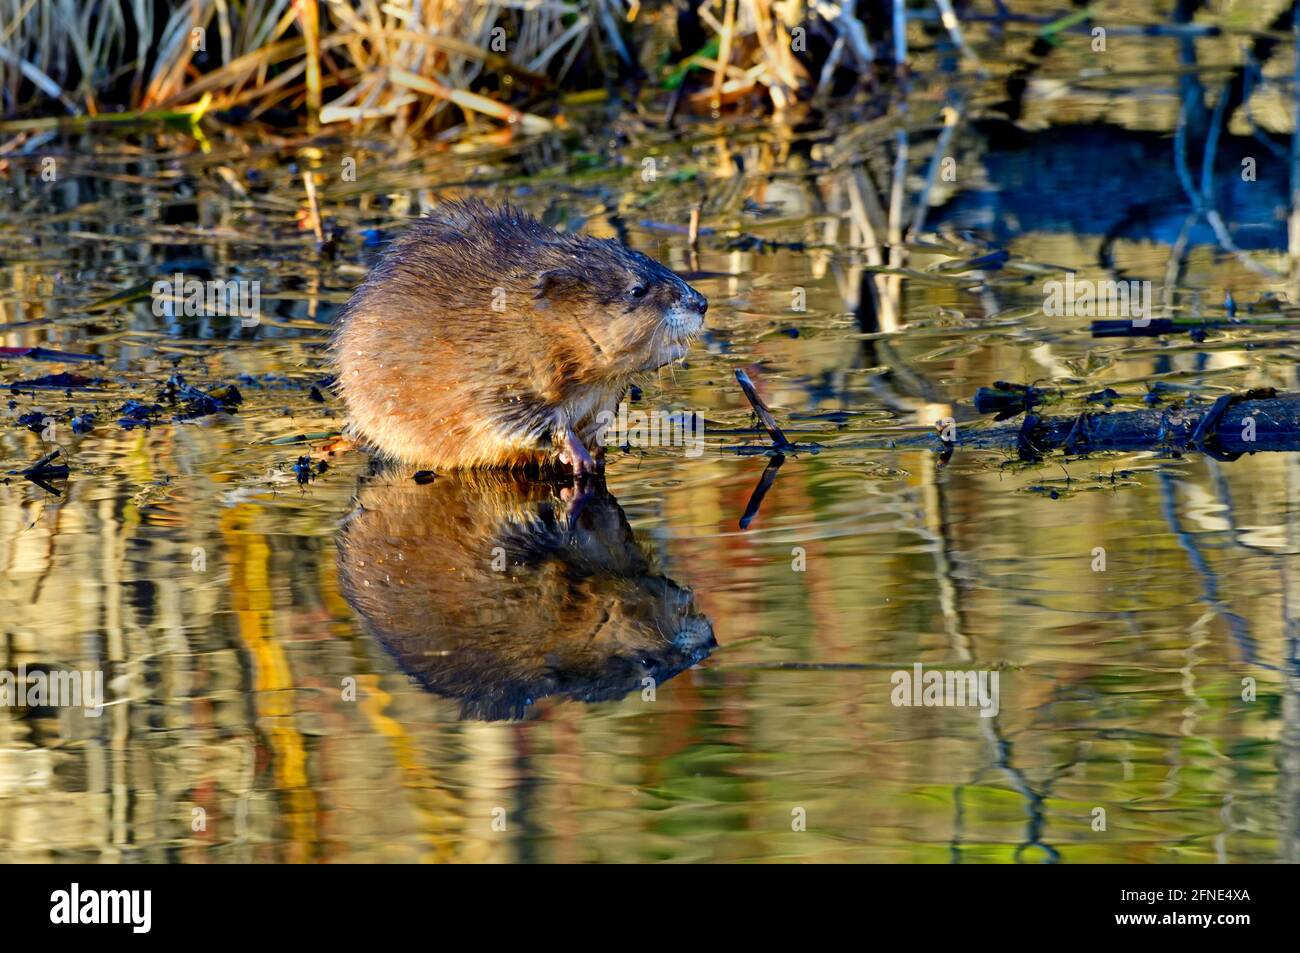 A side view of a wild muskrat  'Ondatra zibethicus', on a sunken stick in a beaver pond in rural Alberta Canada. Stock Photo